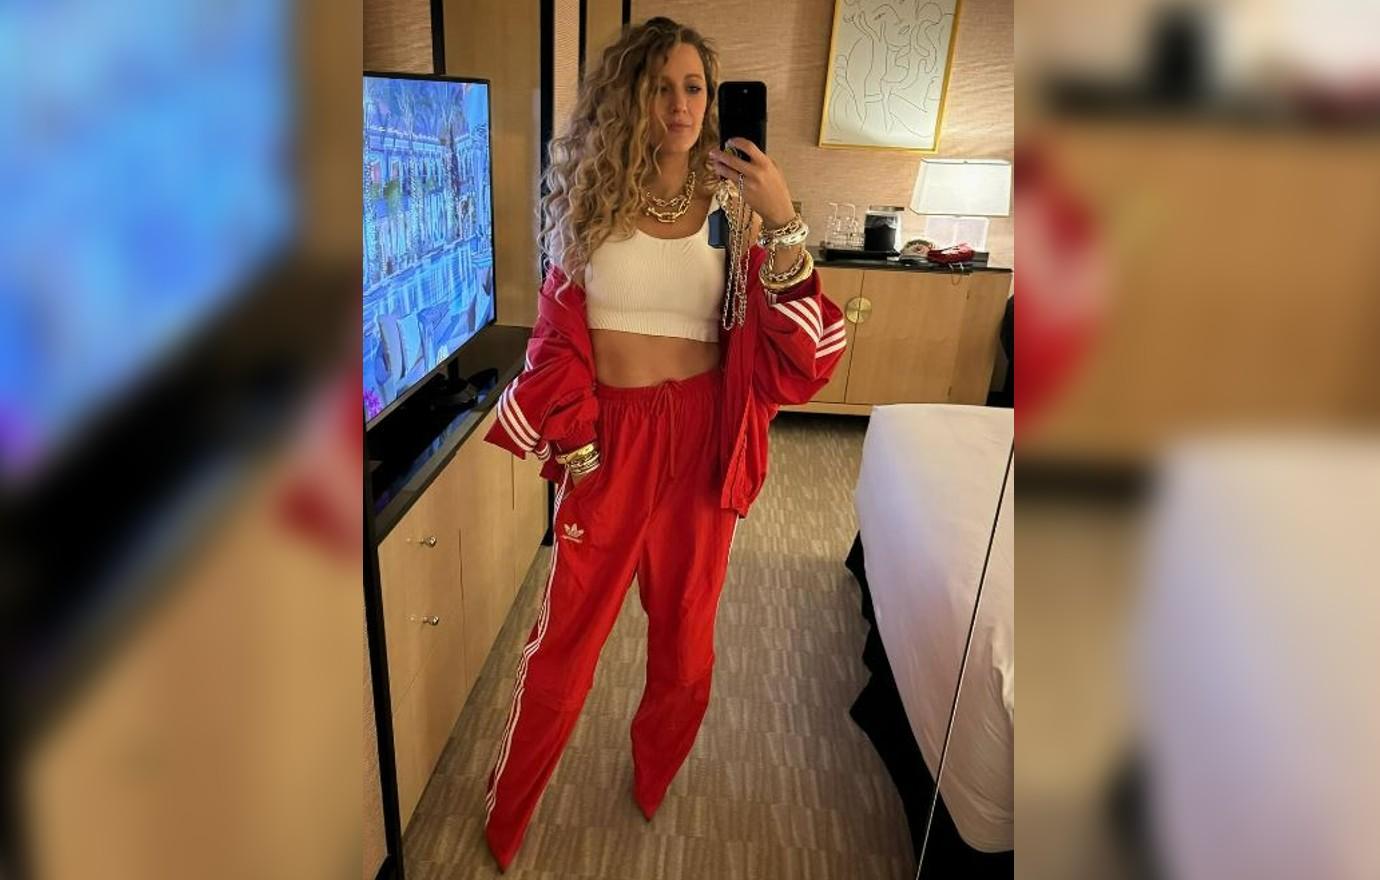 Blake Lively Stuns Fans With 'Pants That Were Shoes' Super Bowl Outfit